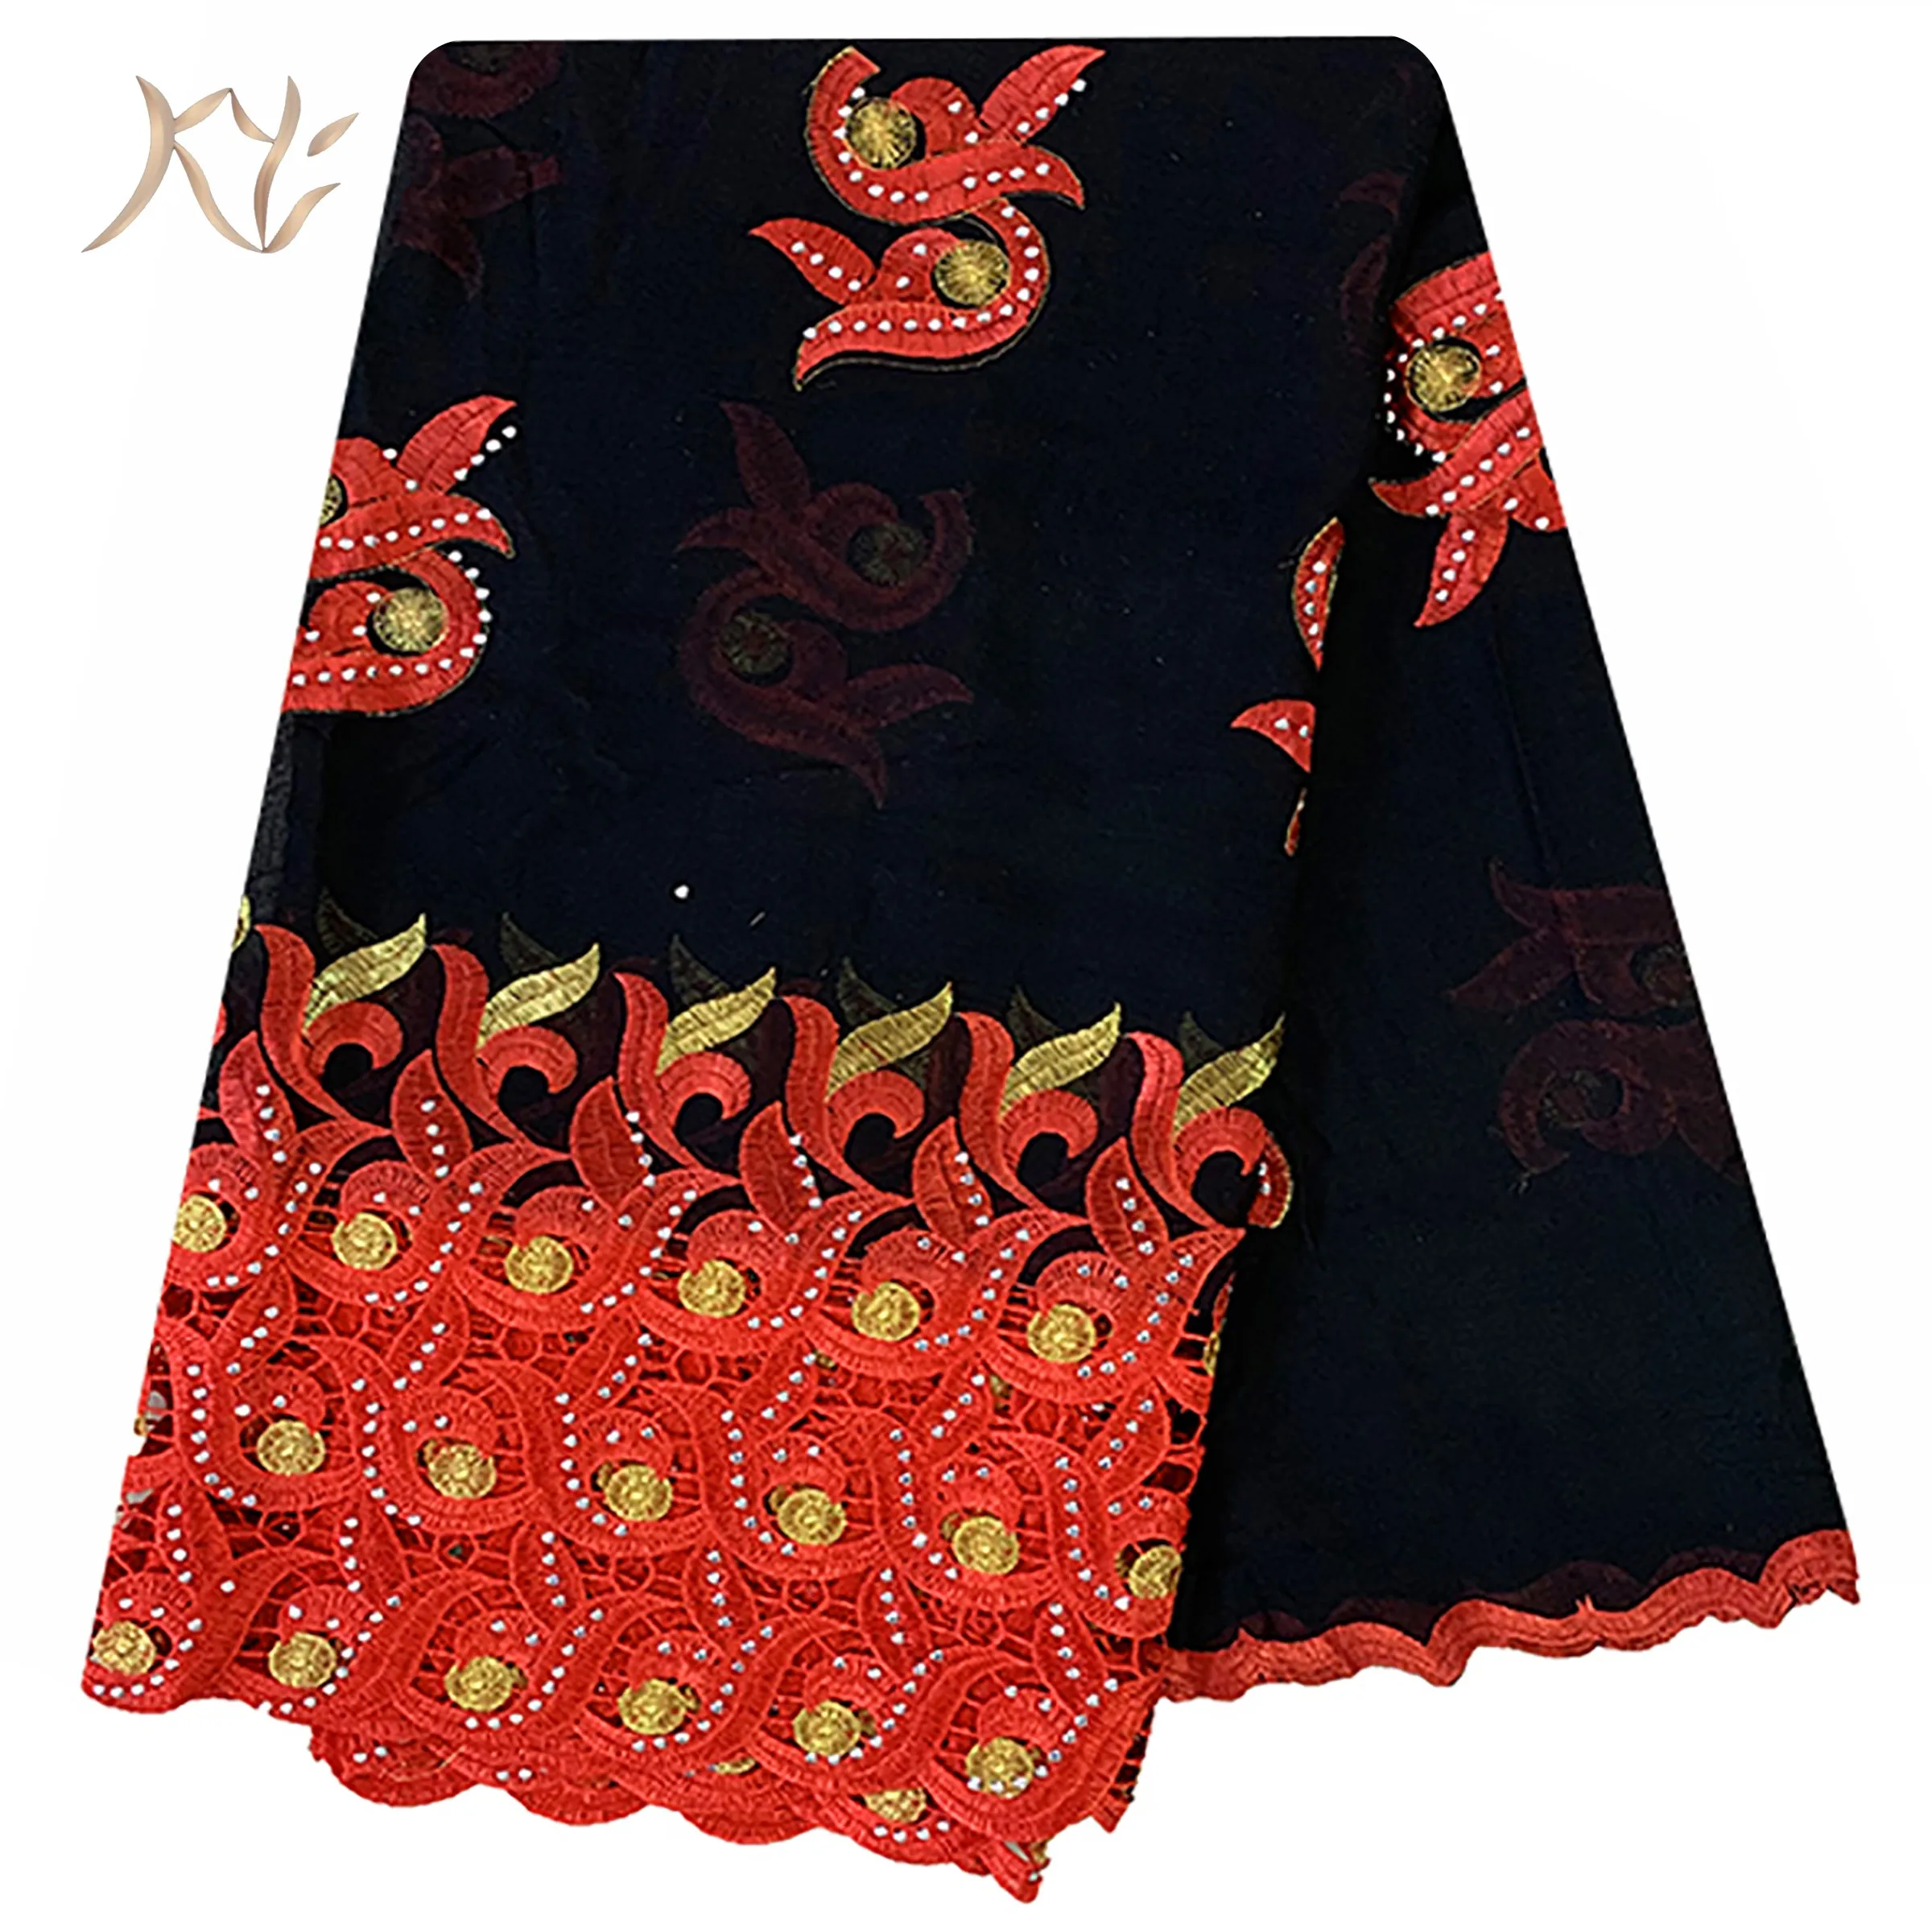 

Hot Sale African Women Scarfs Big Circle Design Big Embrodiery 100% Cotton With Grenadine Big Scarf for Shawls Pashmina Sc-19